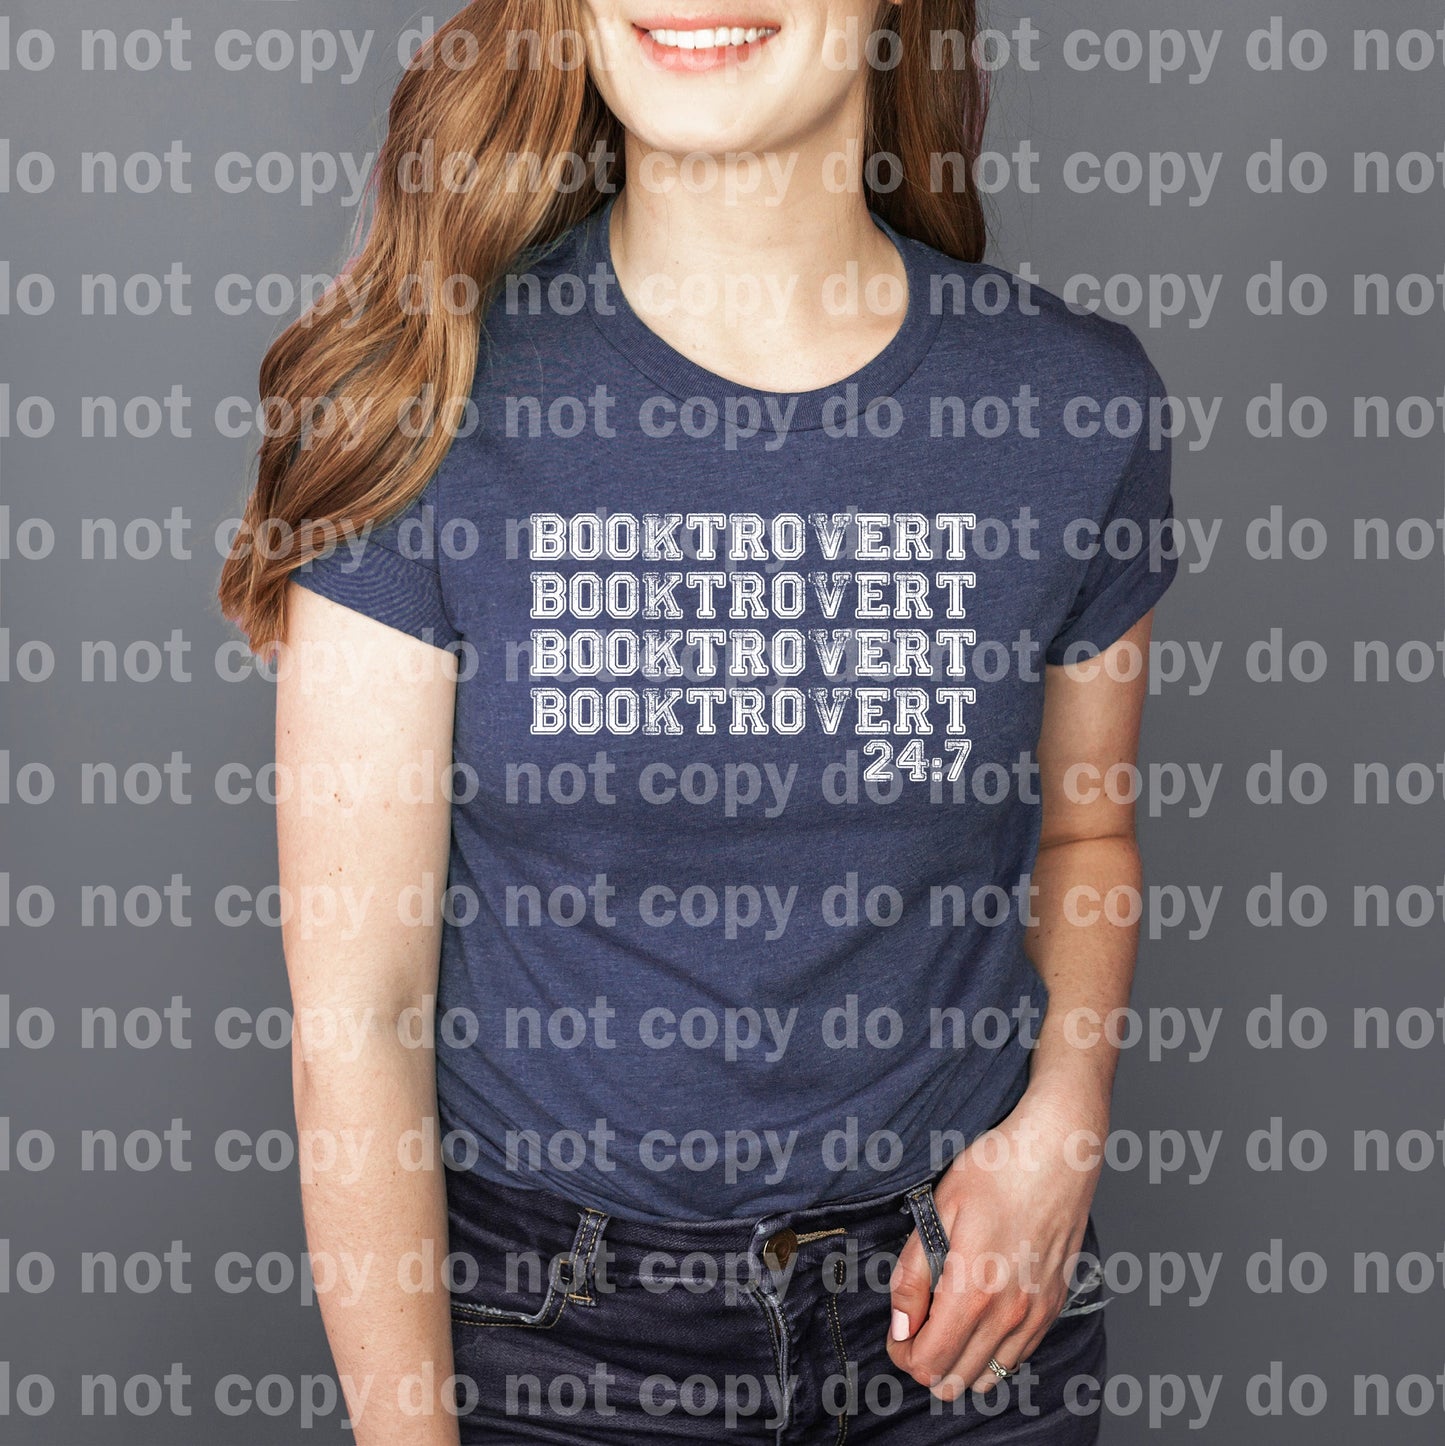 Booktrovert 24:7 Distressed Black/White Dream Print or Sublimation Print